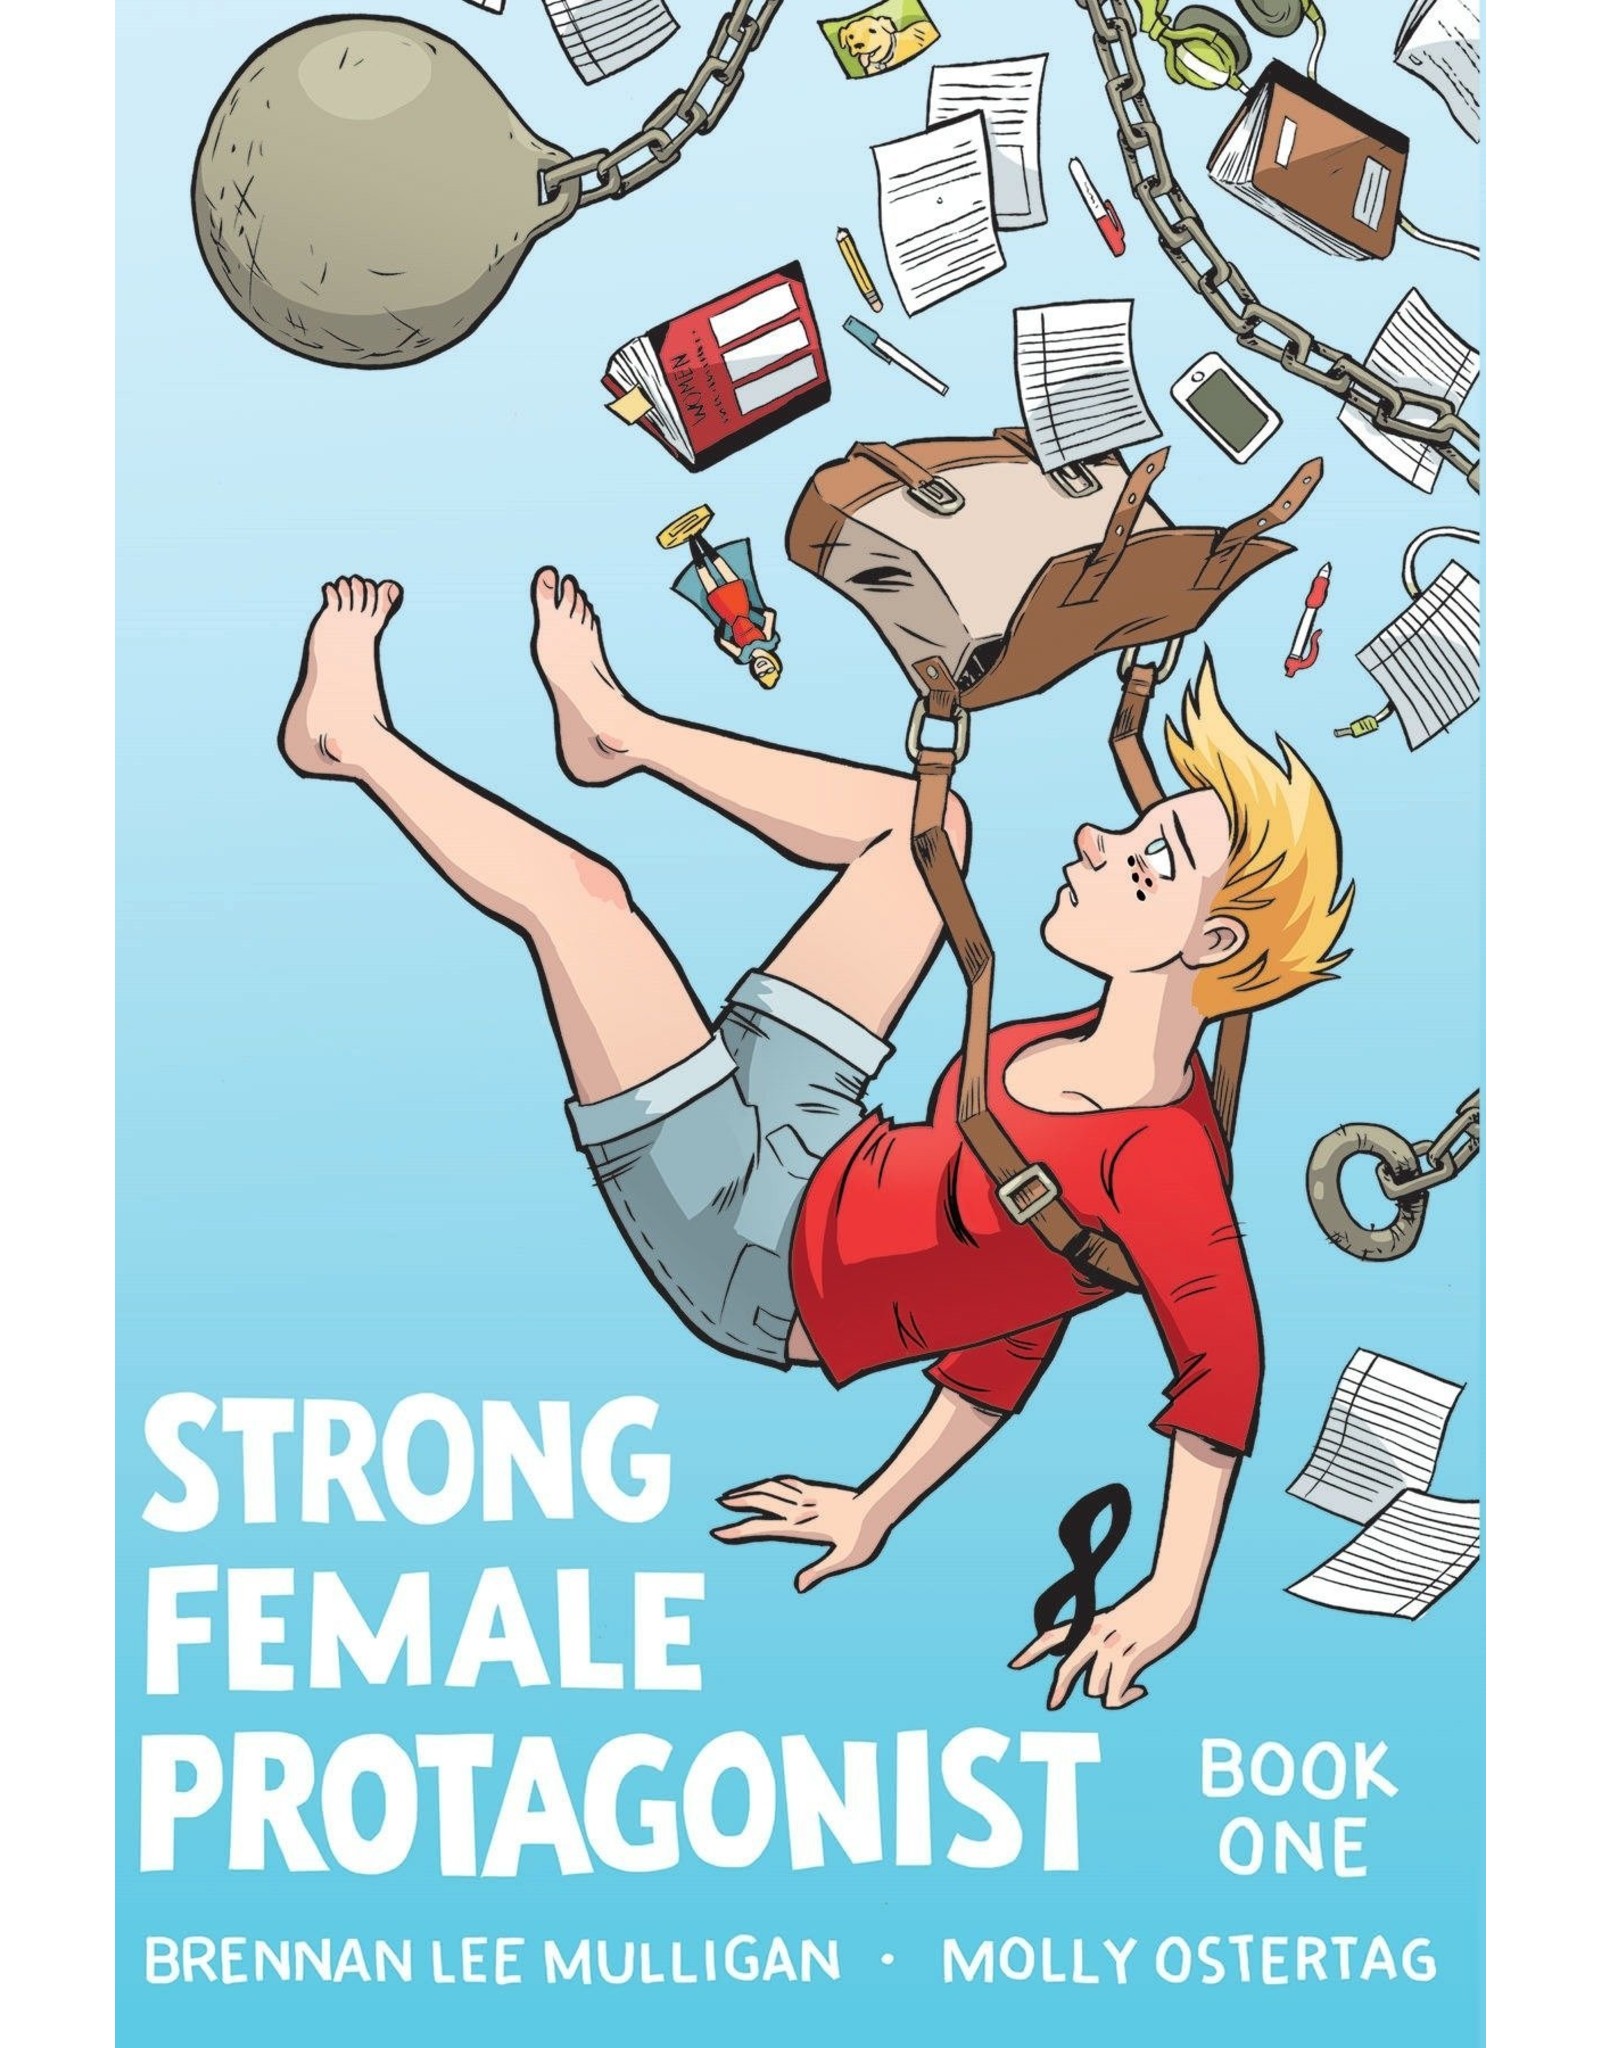 Literature Strong Female Protagonist (Book One)